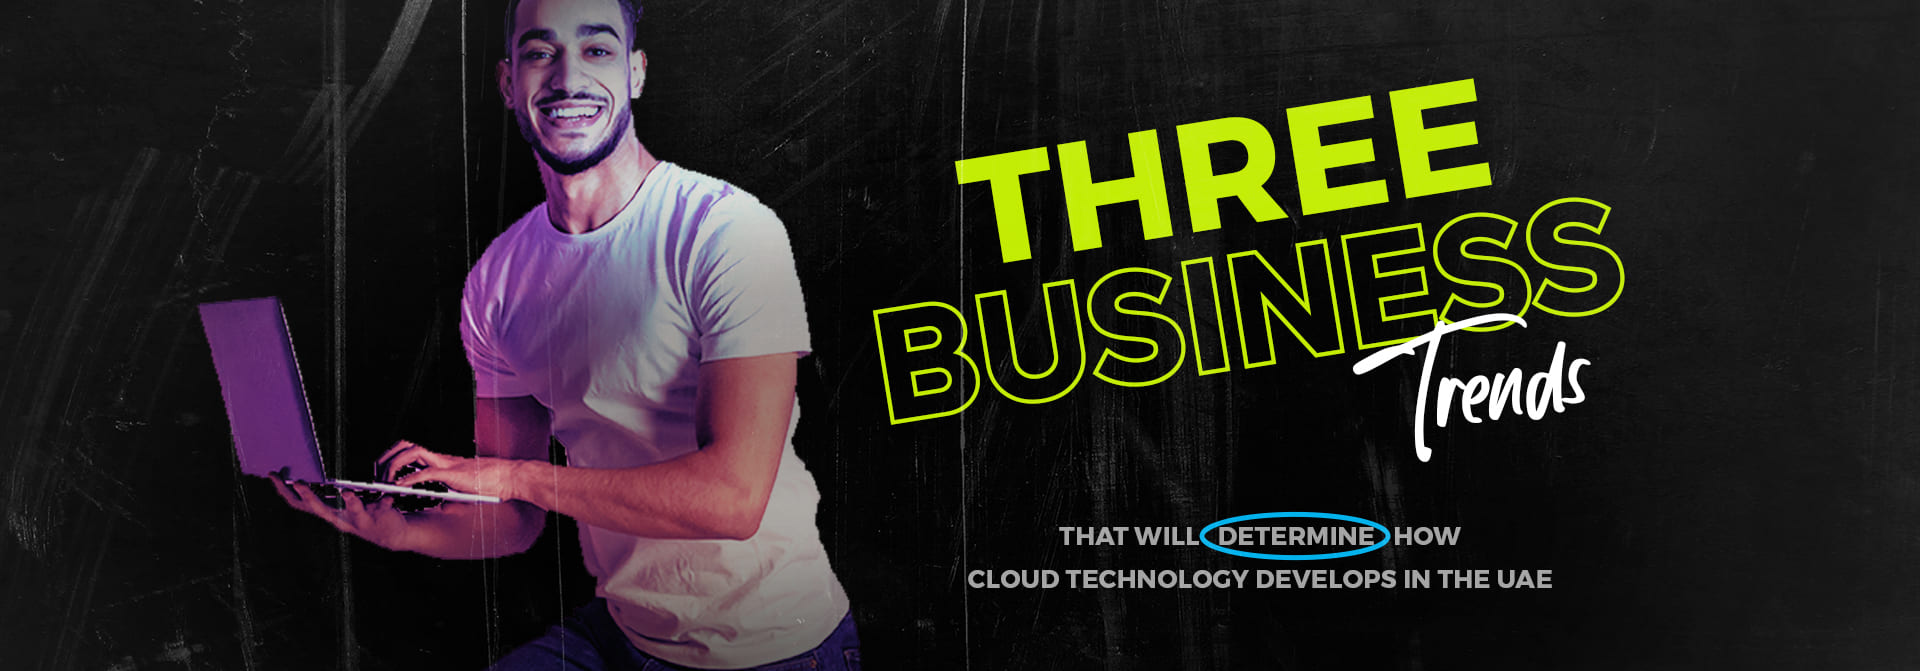 business trends_banner